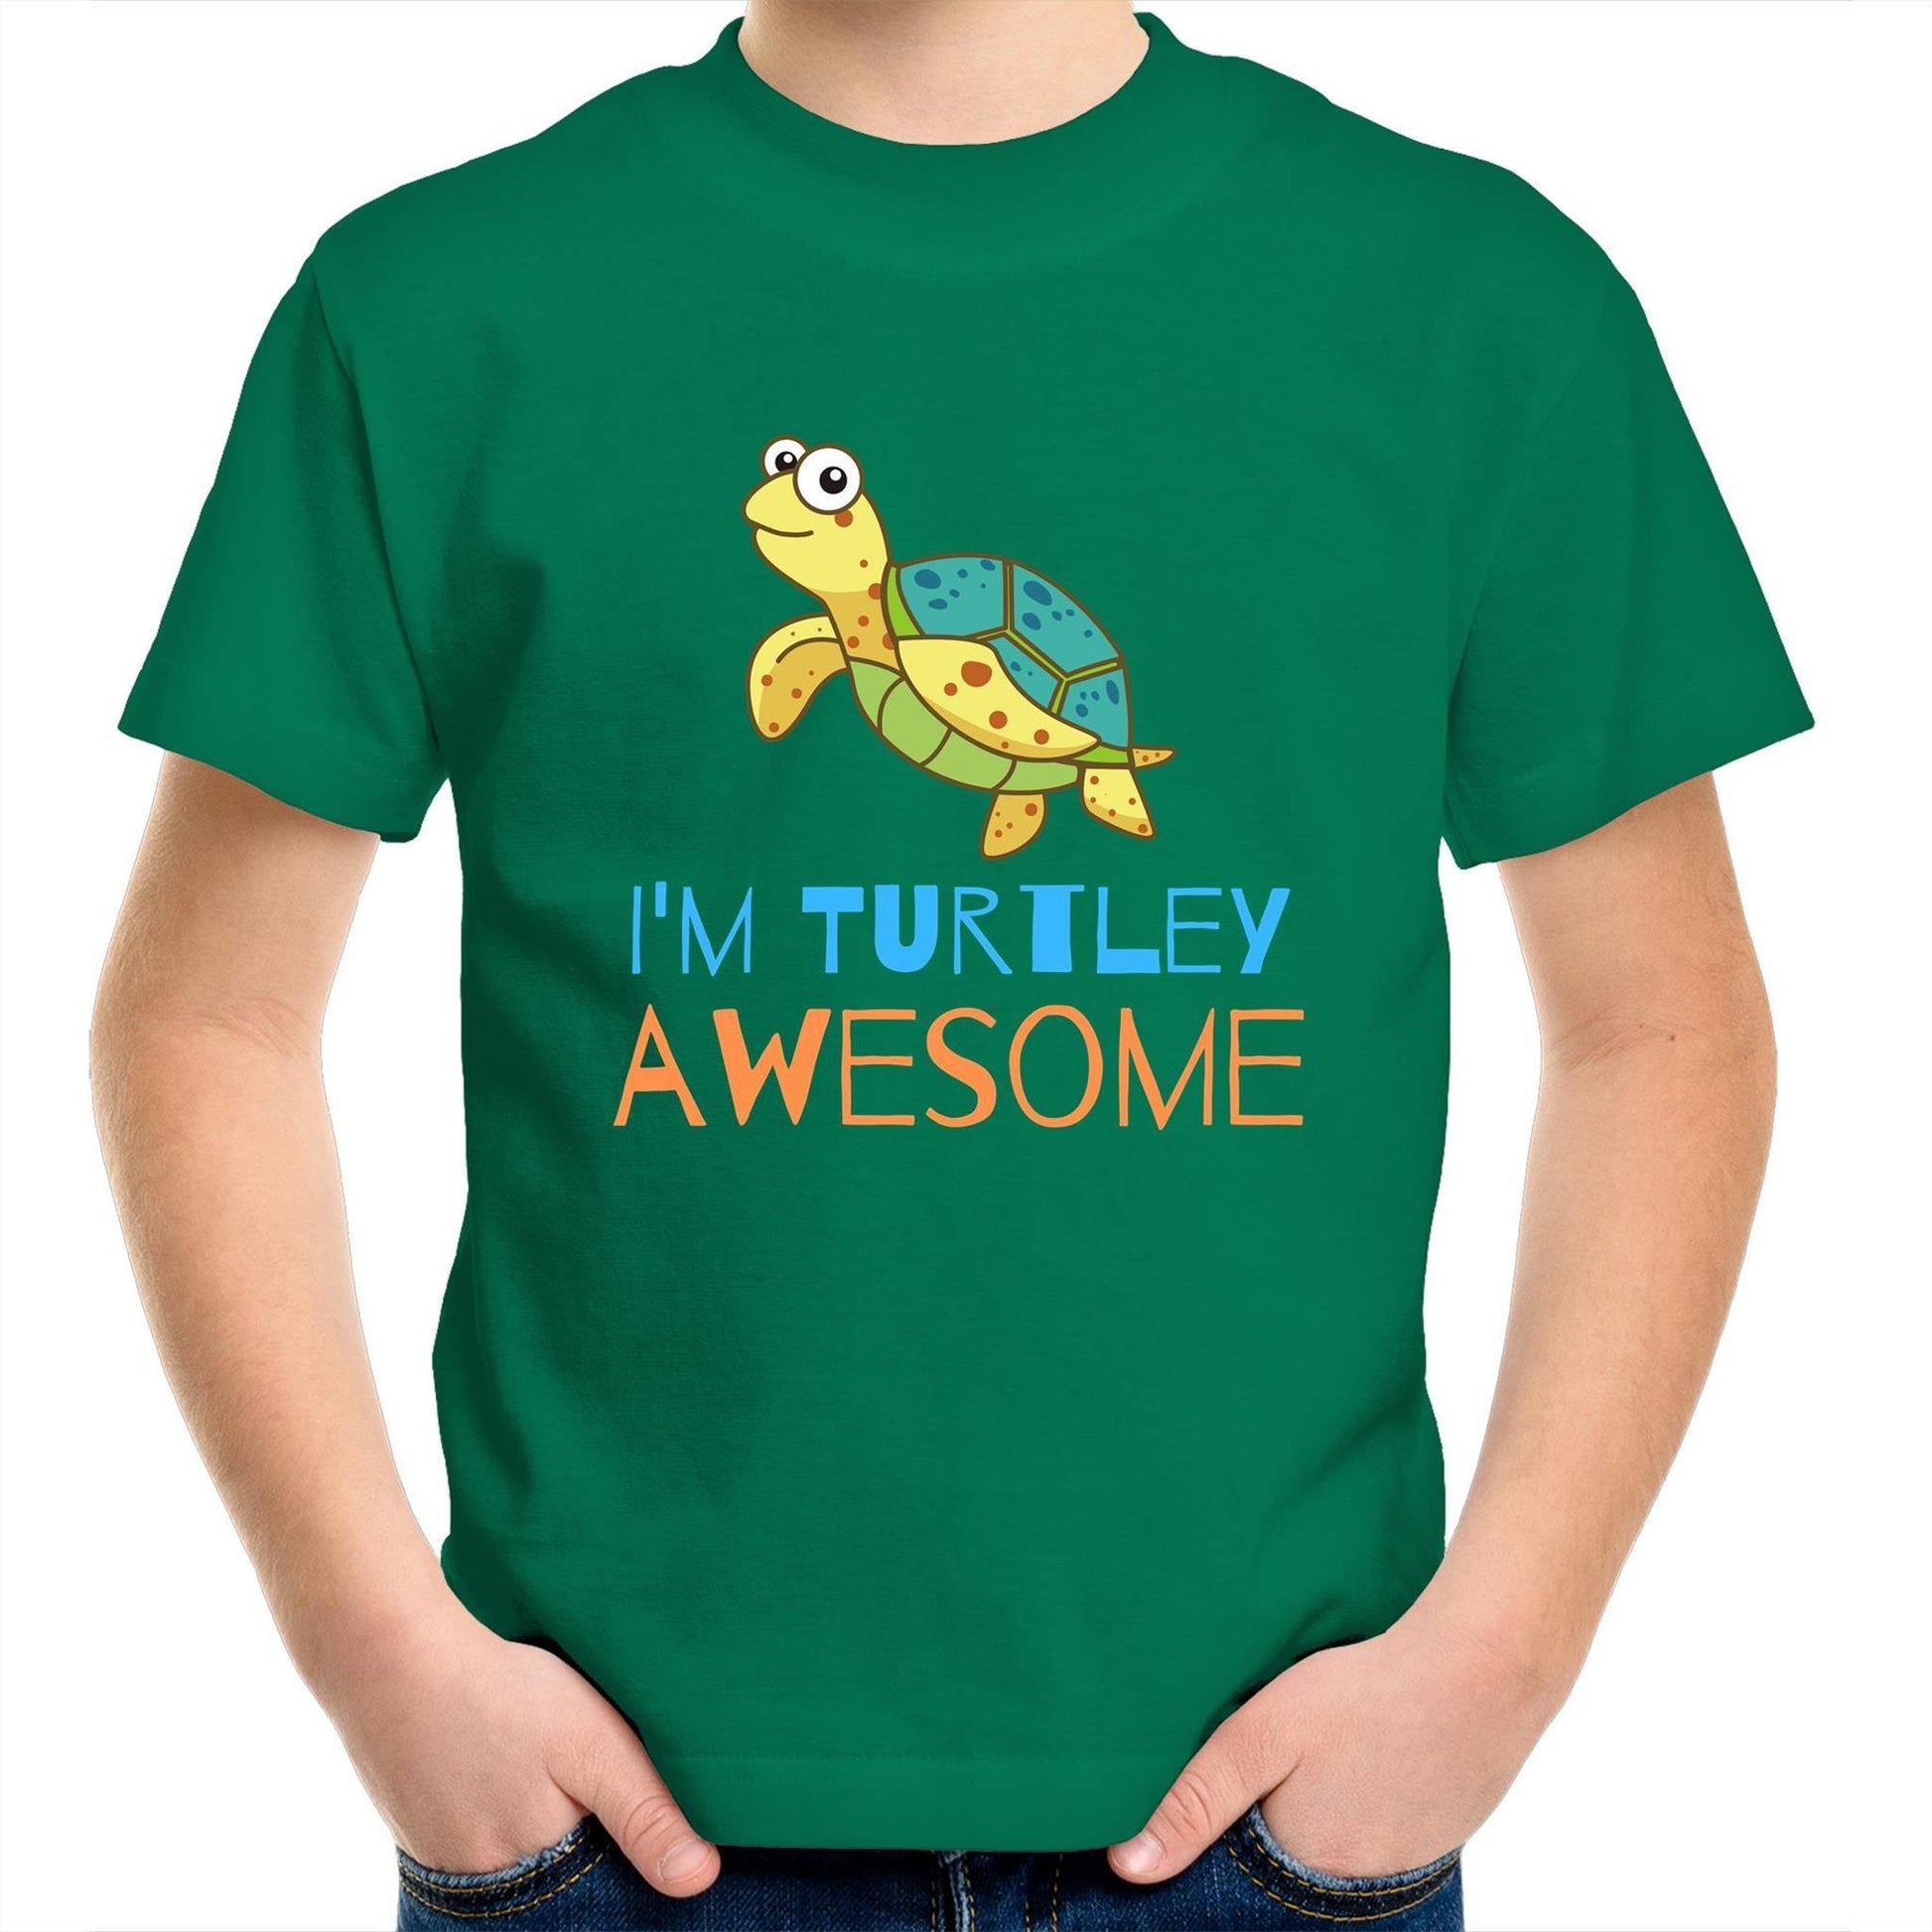 I'm Turtley Awesome - Kids Youth Crew T-Shirt Kelly Green Kids Youth T-shirt animal